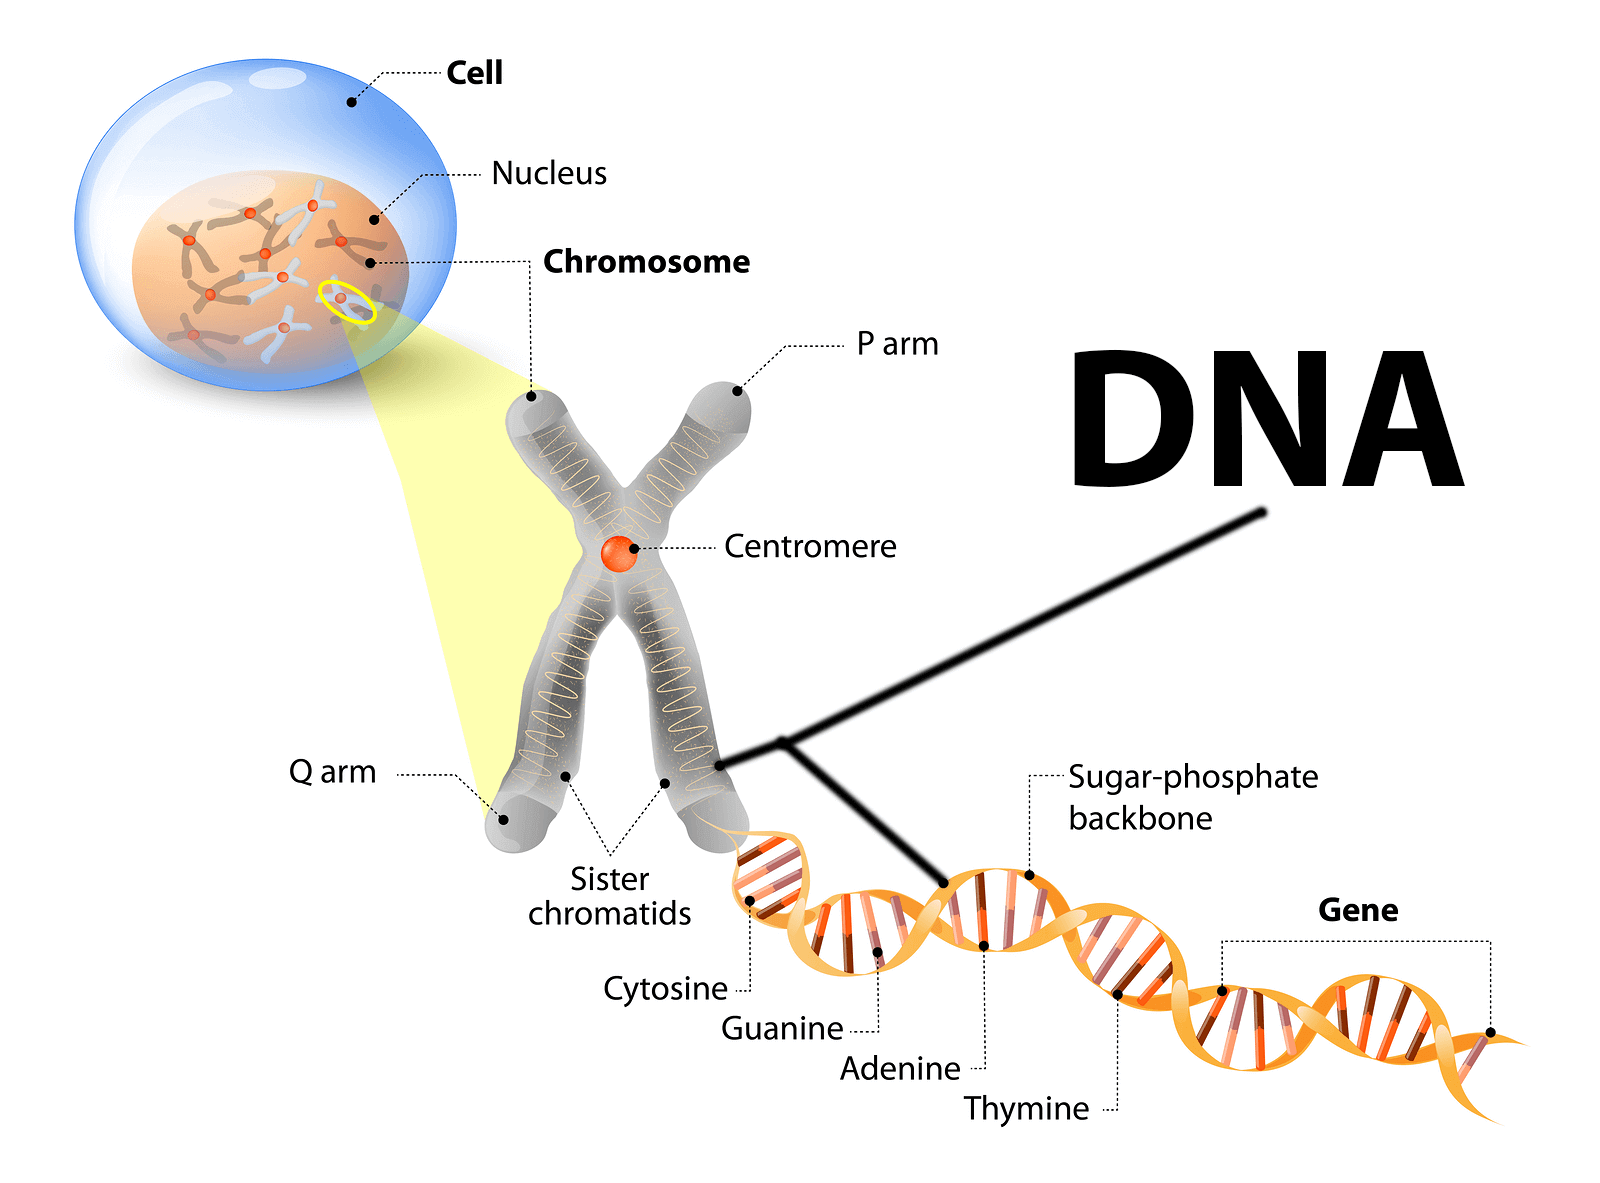 Where is dna found in the cell